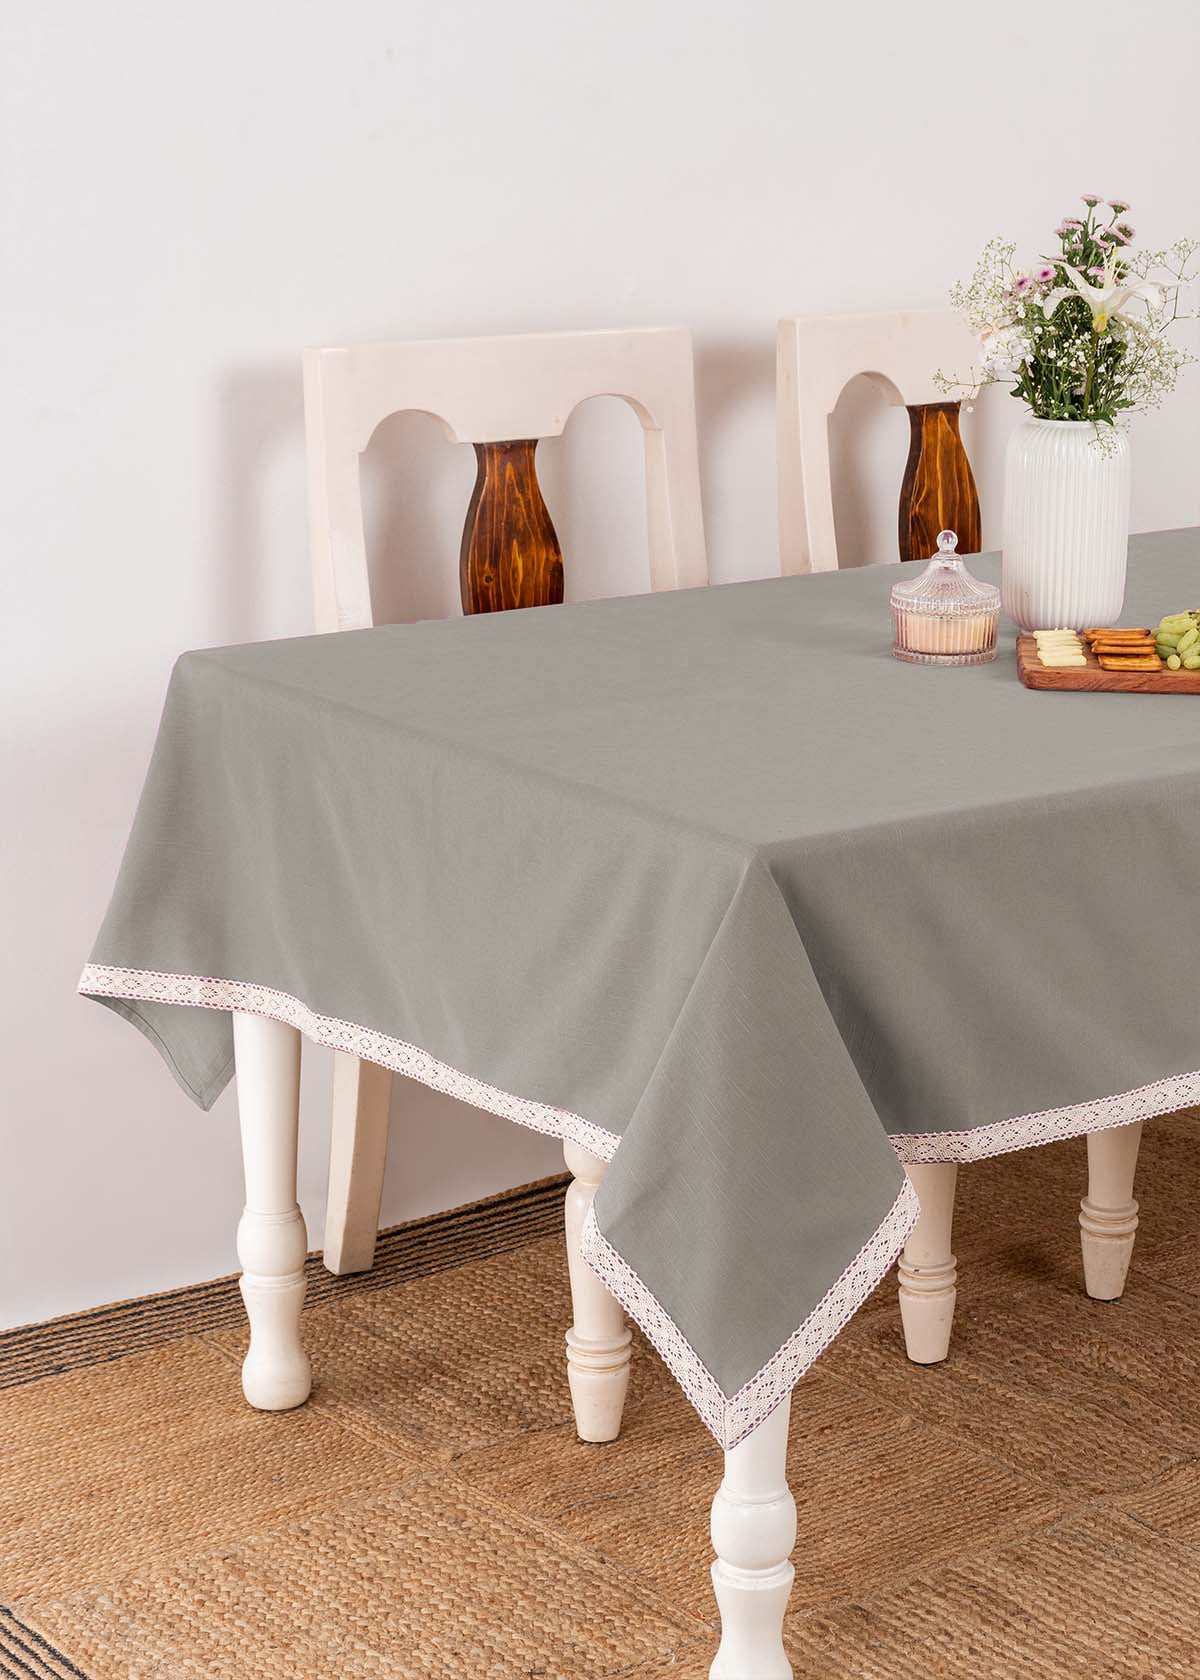 Solid Walnut Grey 100% cotton plain table cloth for 4 seater or 6 seater dining with lace border